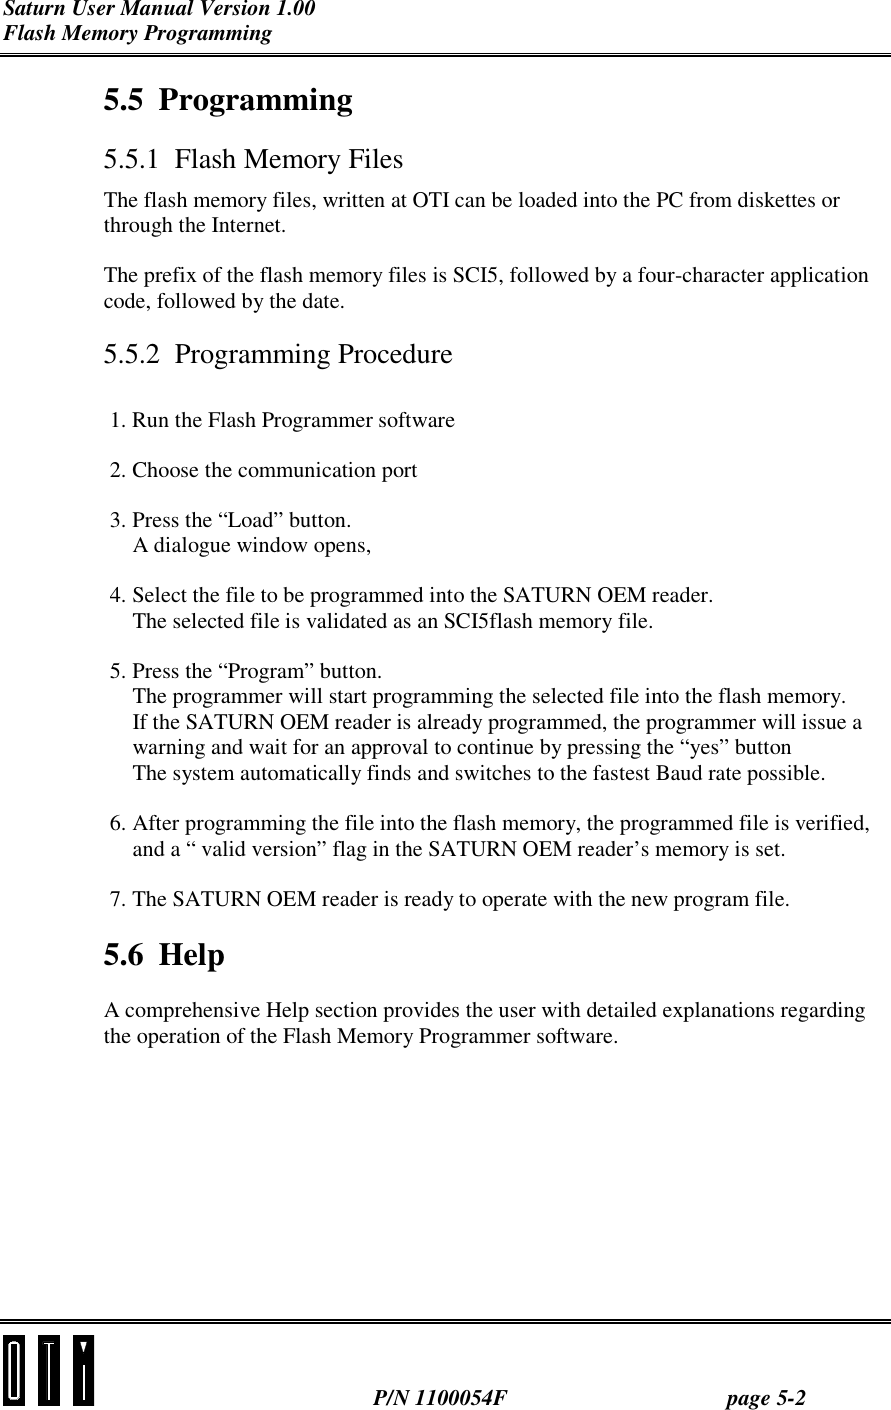 Saturn User Manual Version 1.00 Flash Memory Programming  P/N 1100054F page 5-2 5.5 Programming 5.5.1  Flash Memory Files The flash memory files, written at OTI can be loaded into the PC from diskettes or through the Internet. The prefix of the flash memory files is SCI5, followed by a four-character application code, followed by the date. 5.5.2 Programming Procedure 1. Run the Flash Programmer software 2. Choose the communication port 3. Press the “Load” button. A dialogue window opens, 4. Select the file to be programmed into the SATURN OEM reader. The selected file is validated as an SCI5flash memory file. 5. Press the “Program” button. The programmer will start programming the selected file into the flash memory. If the SATURN OEM reader is already programmed, the programmer will issue a warning and wait for an approval to continue by pressing the “yes” button The system automatically finds and switches to the fastest Baud rate possible. 6. After programming the file into the flash memory, the programmed file is verified, and a “ valid version” flag in the SATURN OEM reader’s memory is set. 7. The SATURN OEM reader is ready to operate with the new program file. 5.6 Help A comprehensive Help section provides the user with detailed explanations regarding the operation of the Flash Memory Programmer software.  